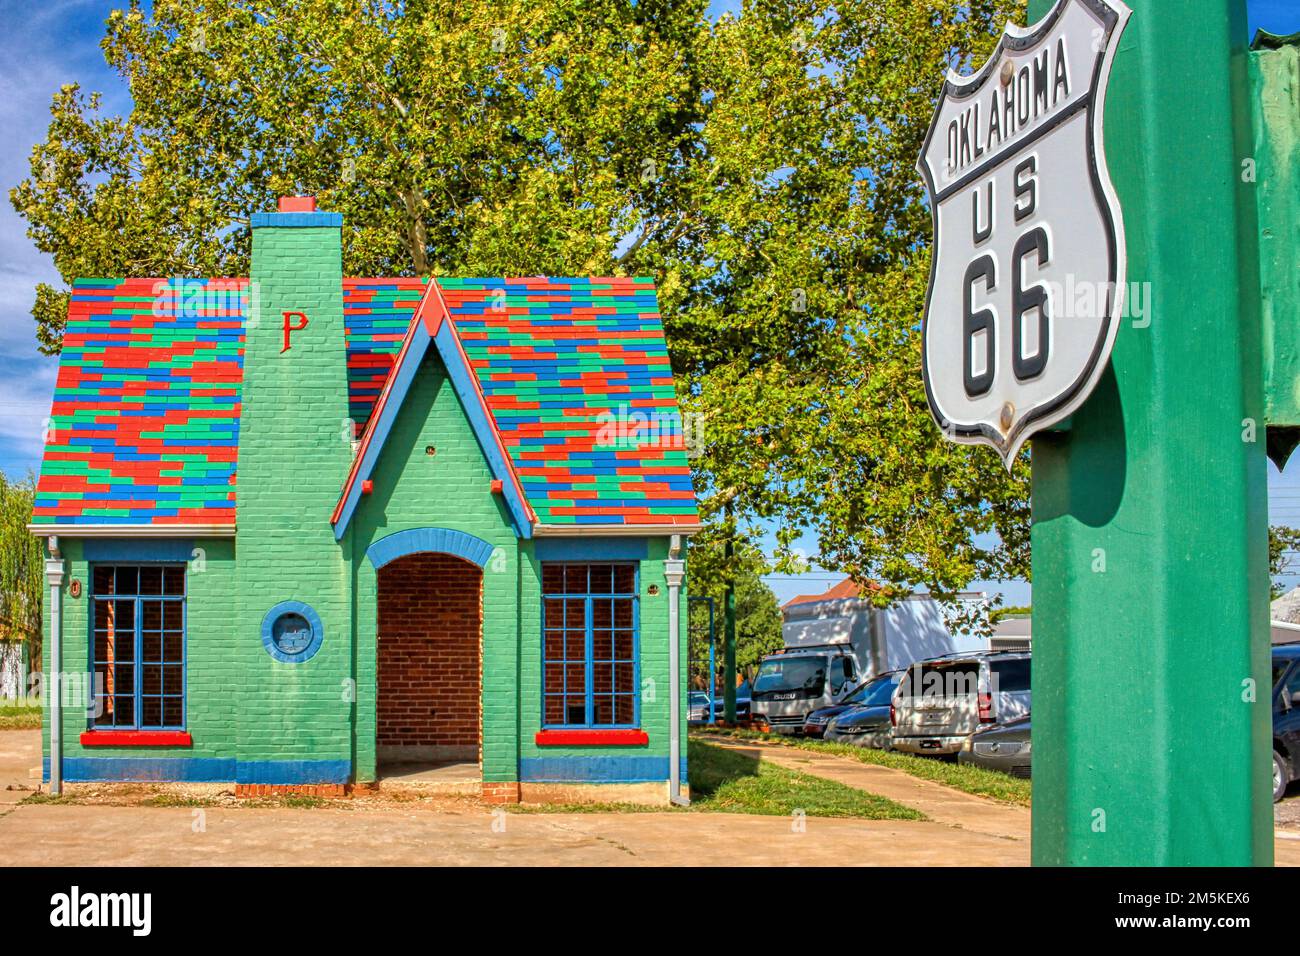 A vintage 1930's cottage-style Phillips 66 gas station sits on Manvel Avenue, Route 66, in Chandler Oklahoma. Stock Photo